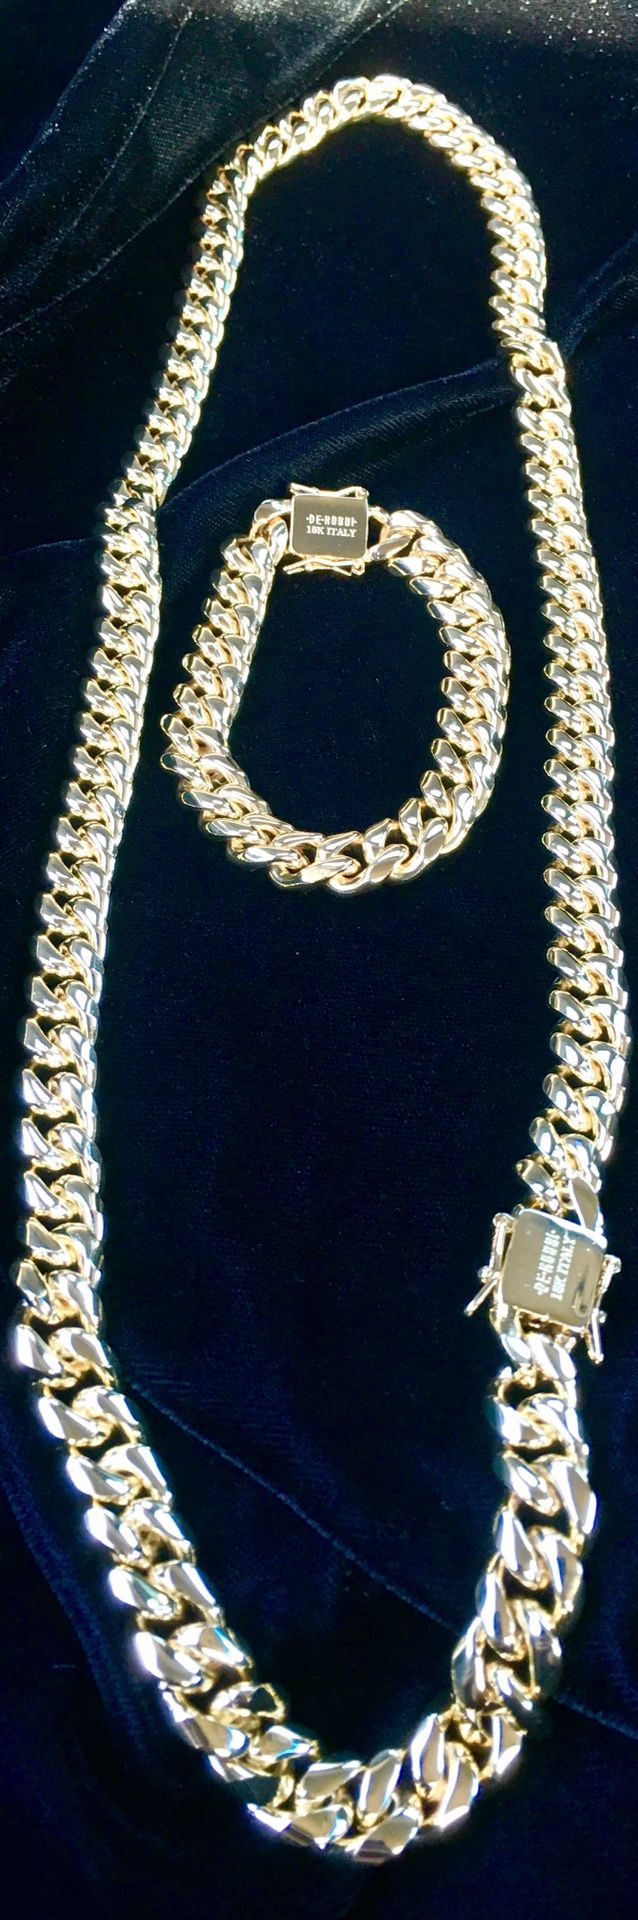 CUBAN LINK 18K GOLD NEW CHAIN MADE IN ITALY ⭐️ BLACK FRIDAY EXTENDED ALL WEEK SALE!!!!! ⭐️